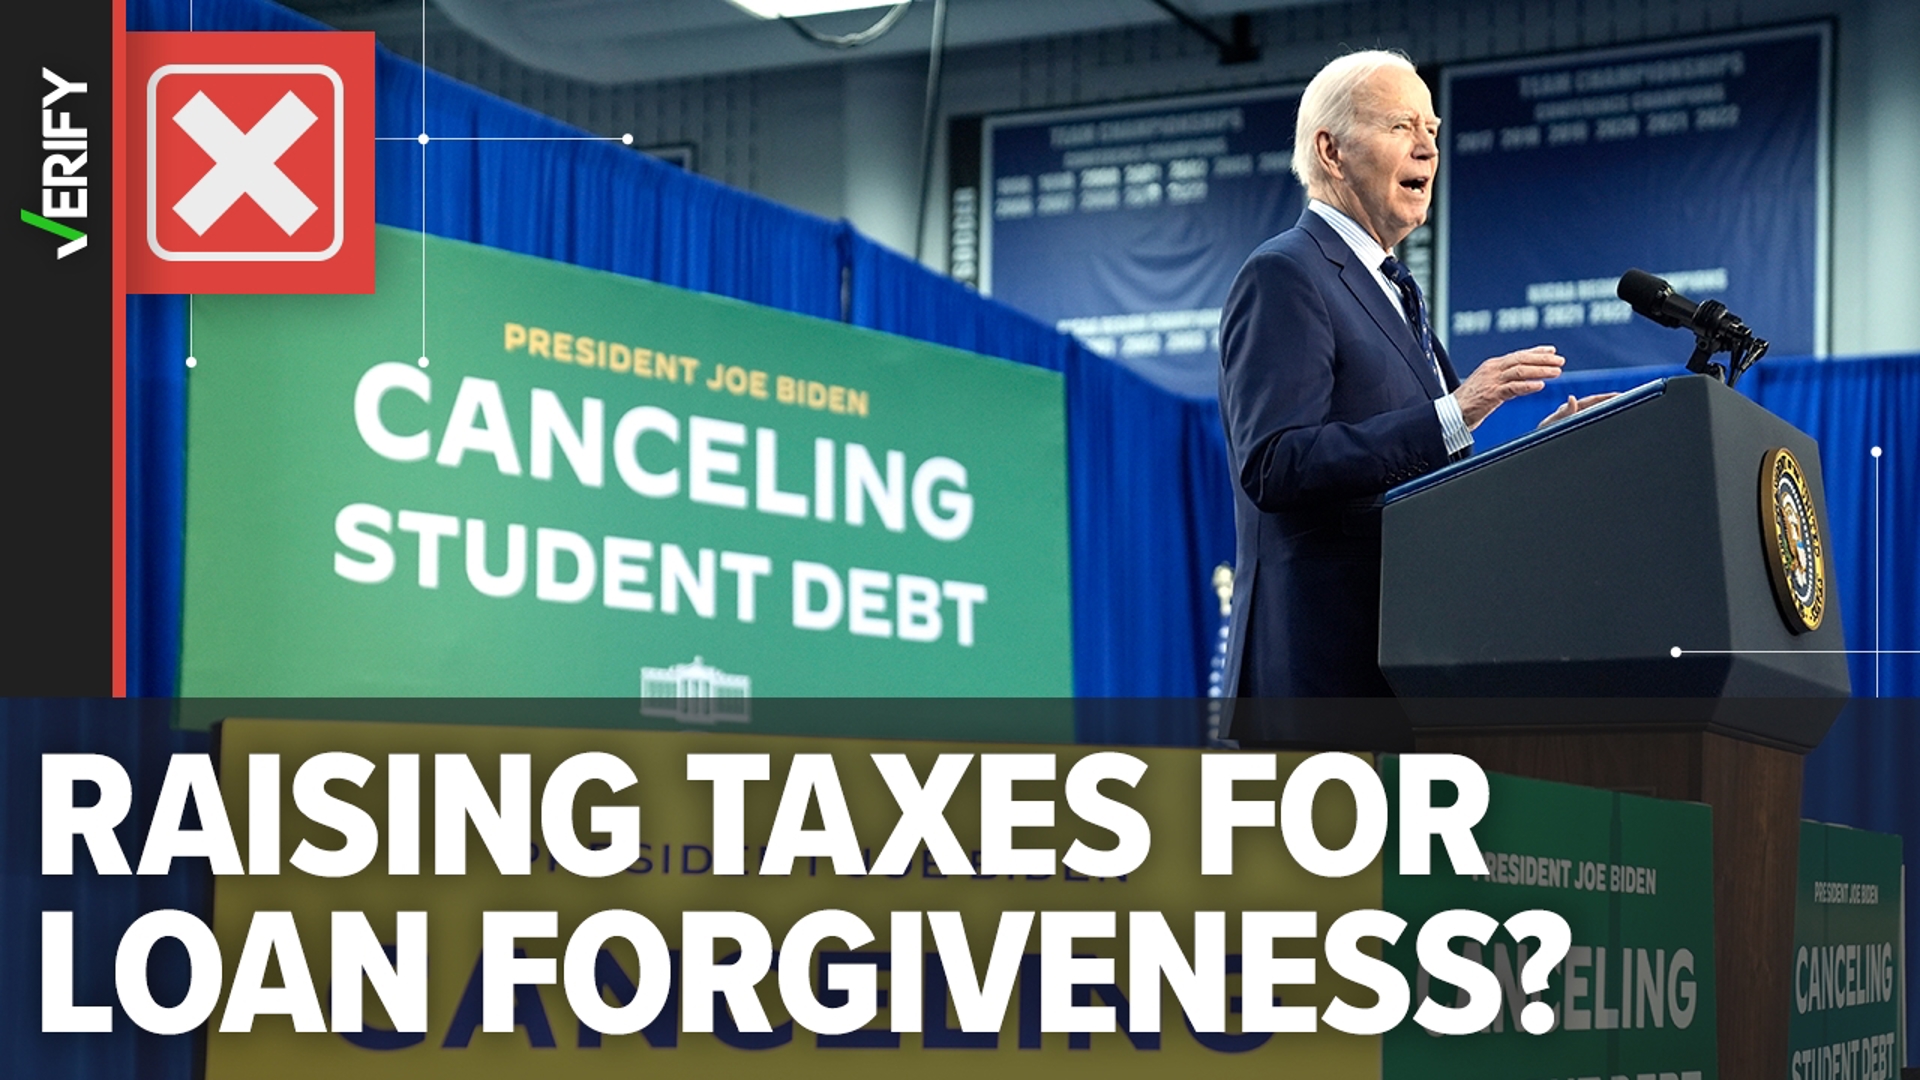 President Biden’s student debt relief plan does not raise taxes to pay for it, which is something only Congress can do.